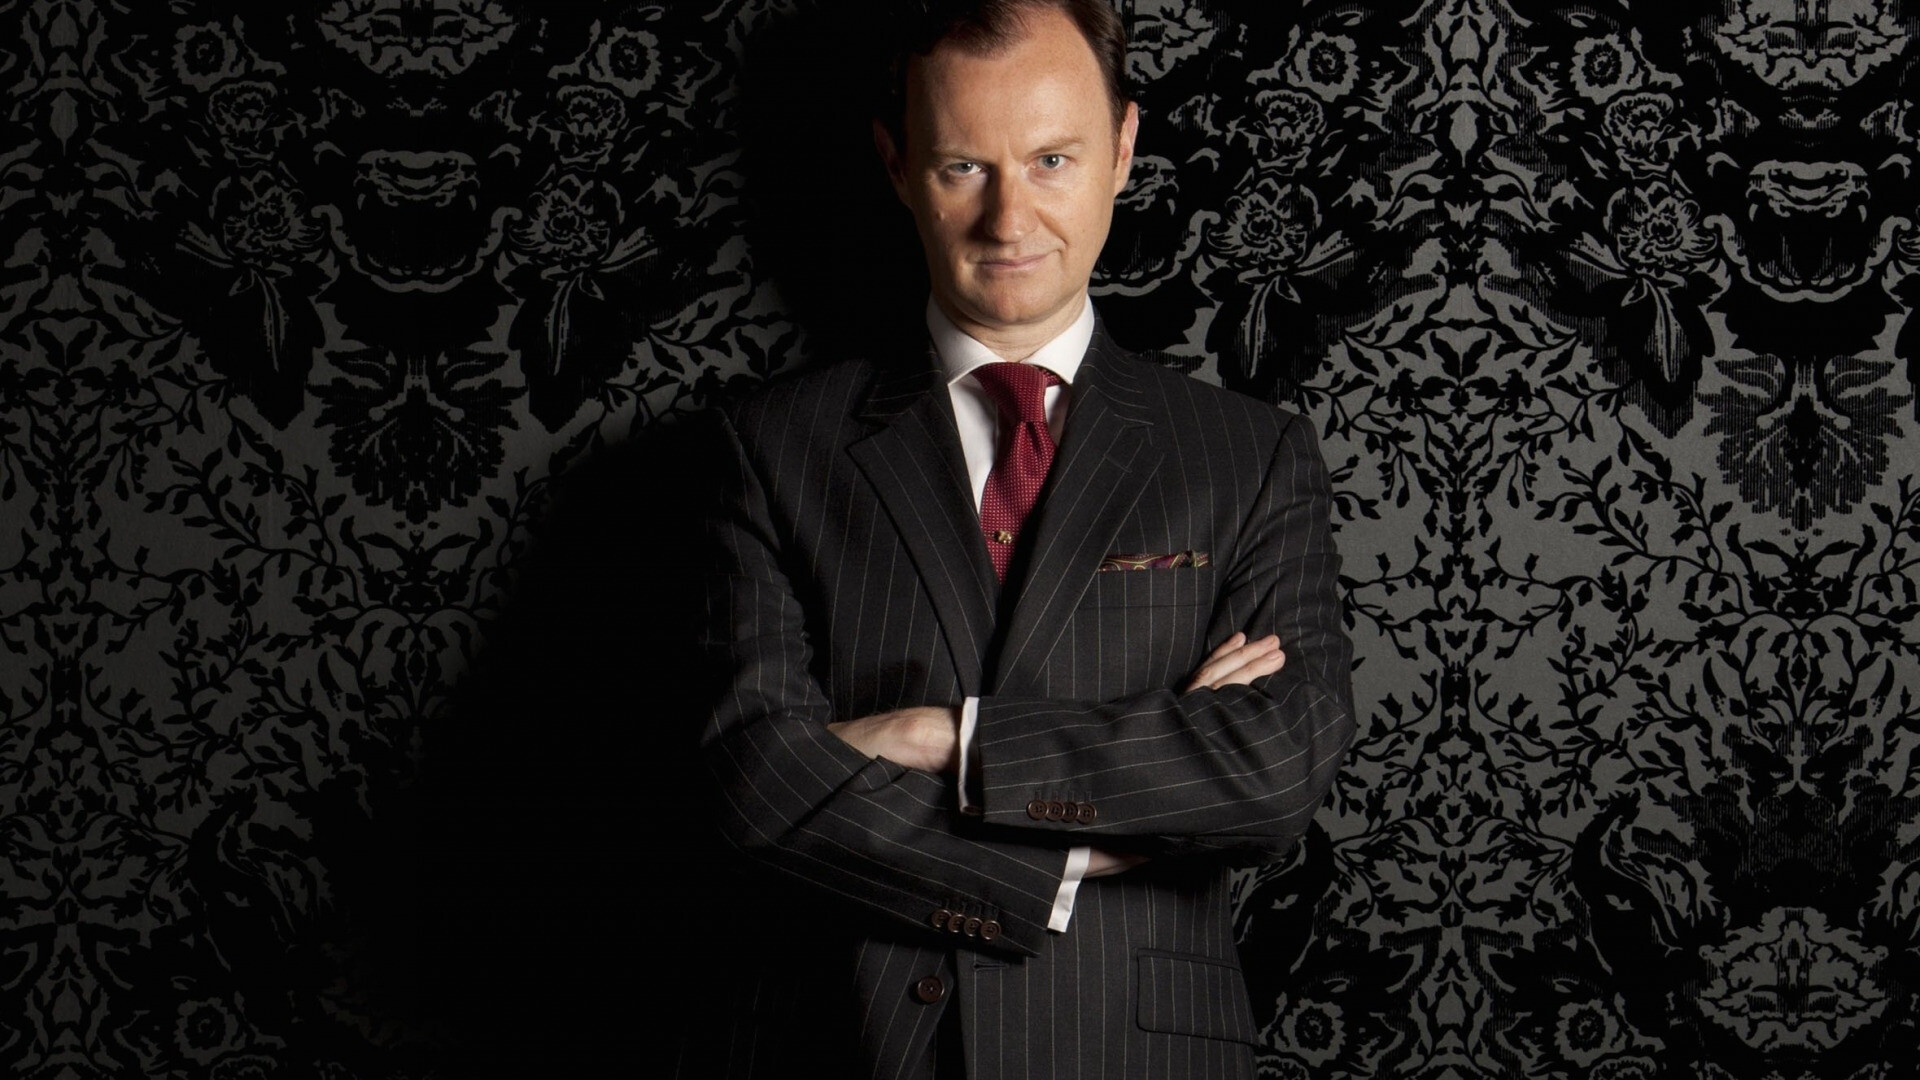 Mark Gatiss: "The Abominable Bride", Crooked House, a Ghost Story, BBC Four. 1920x1080 Full HD Background.